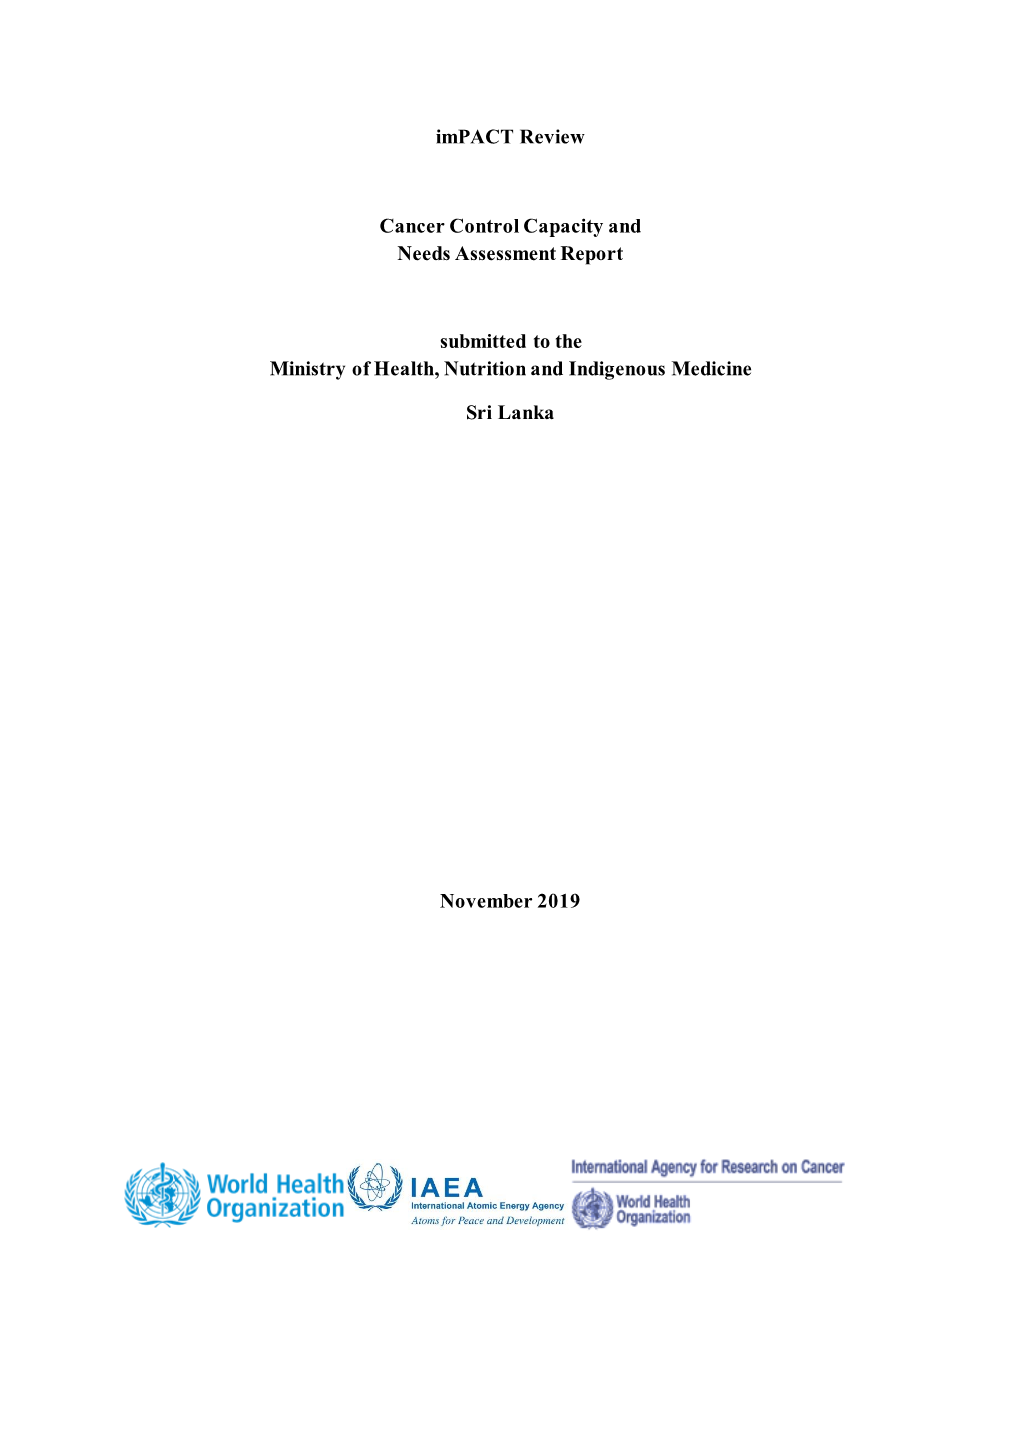 Impact Review Report” Submitted to the Minister of Health